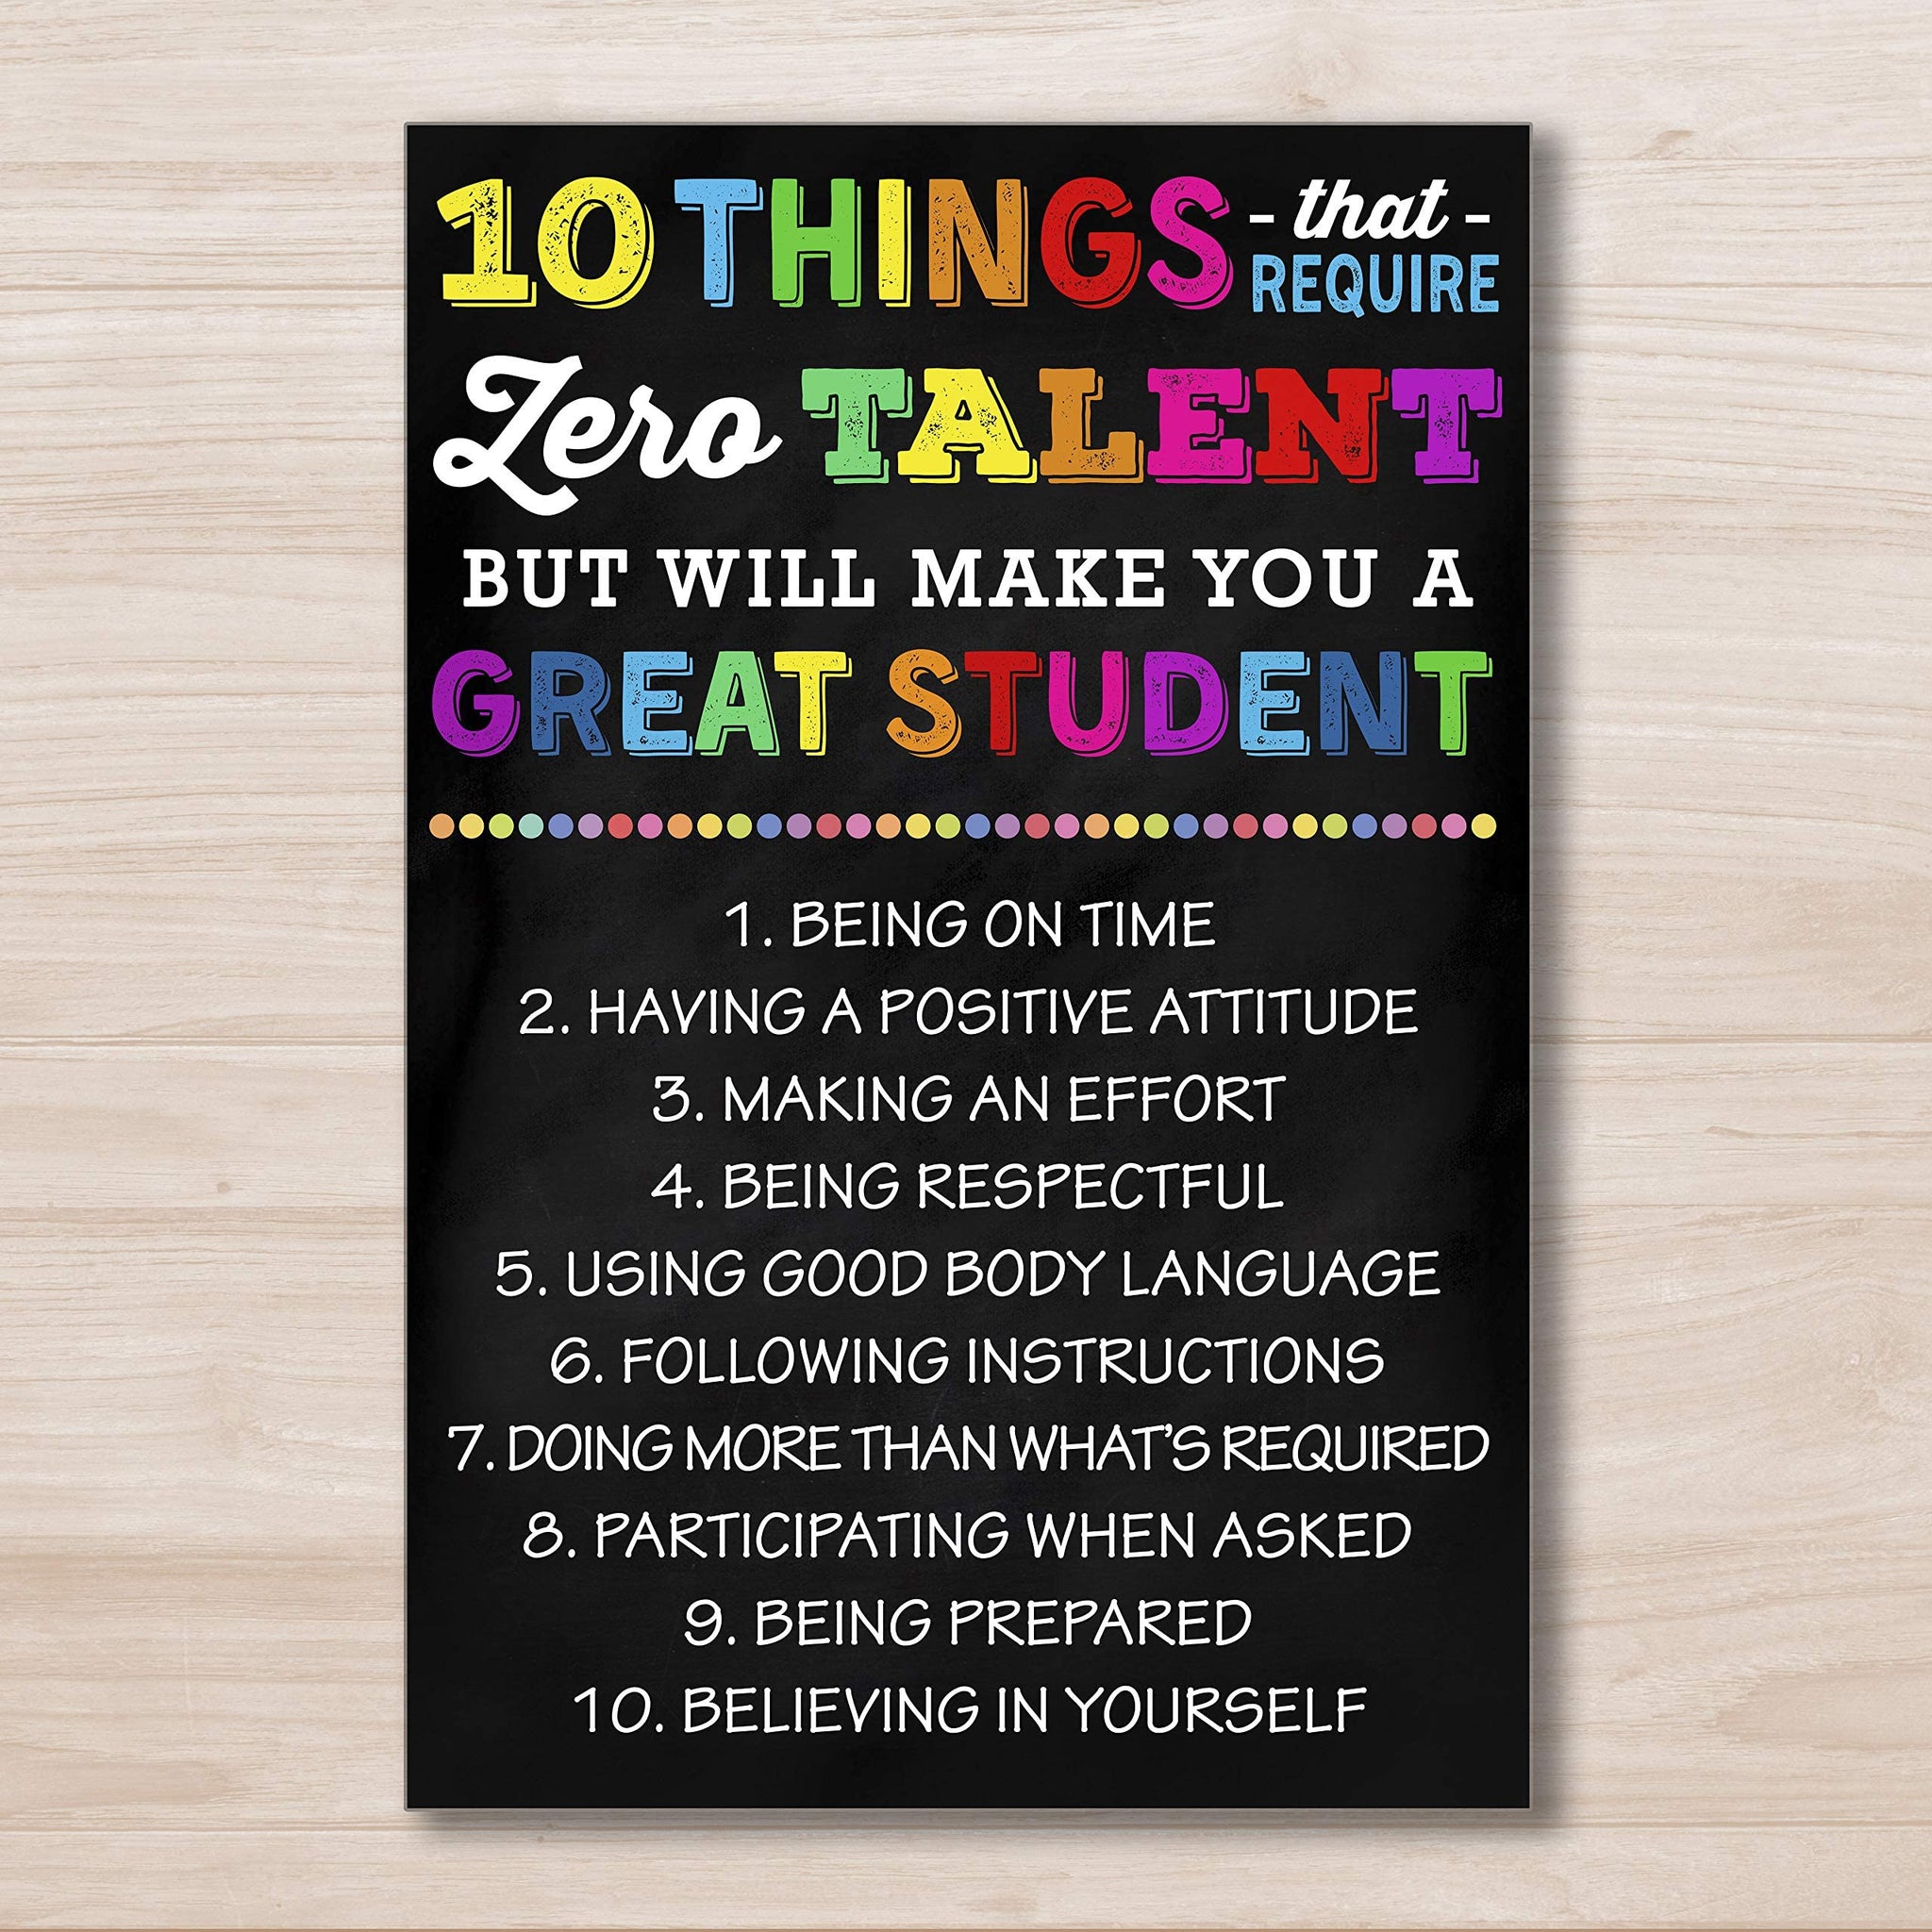 10 Things That Require Zero Talent, Back To School, Successful Student, Classroom Management, Classroom Decor